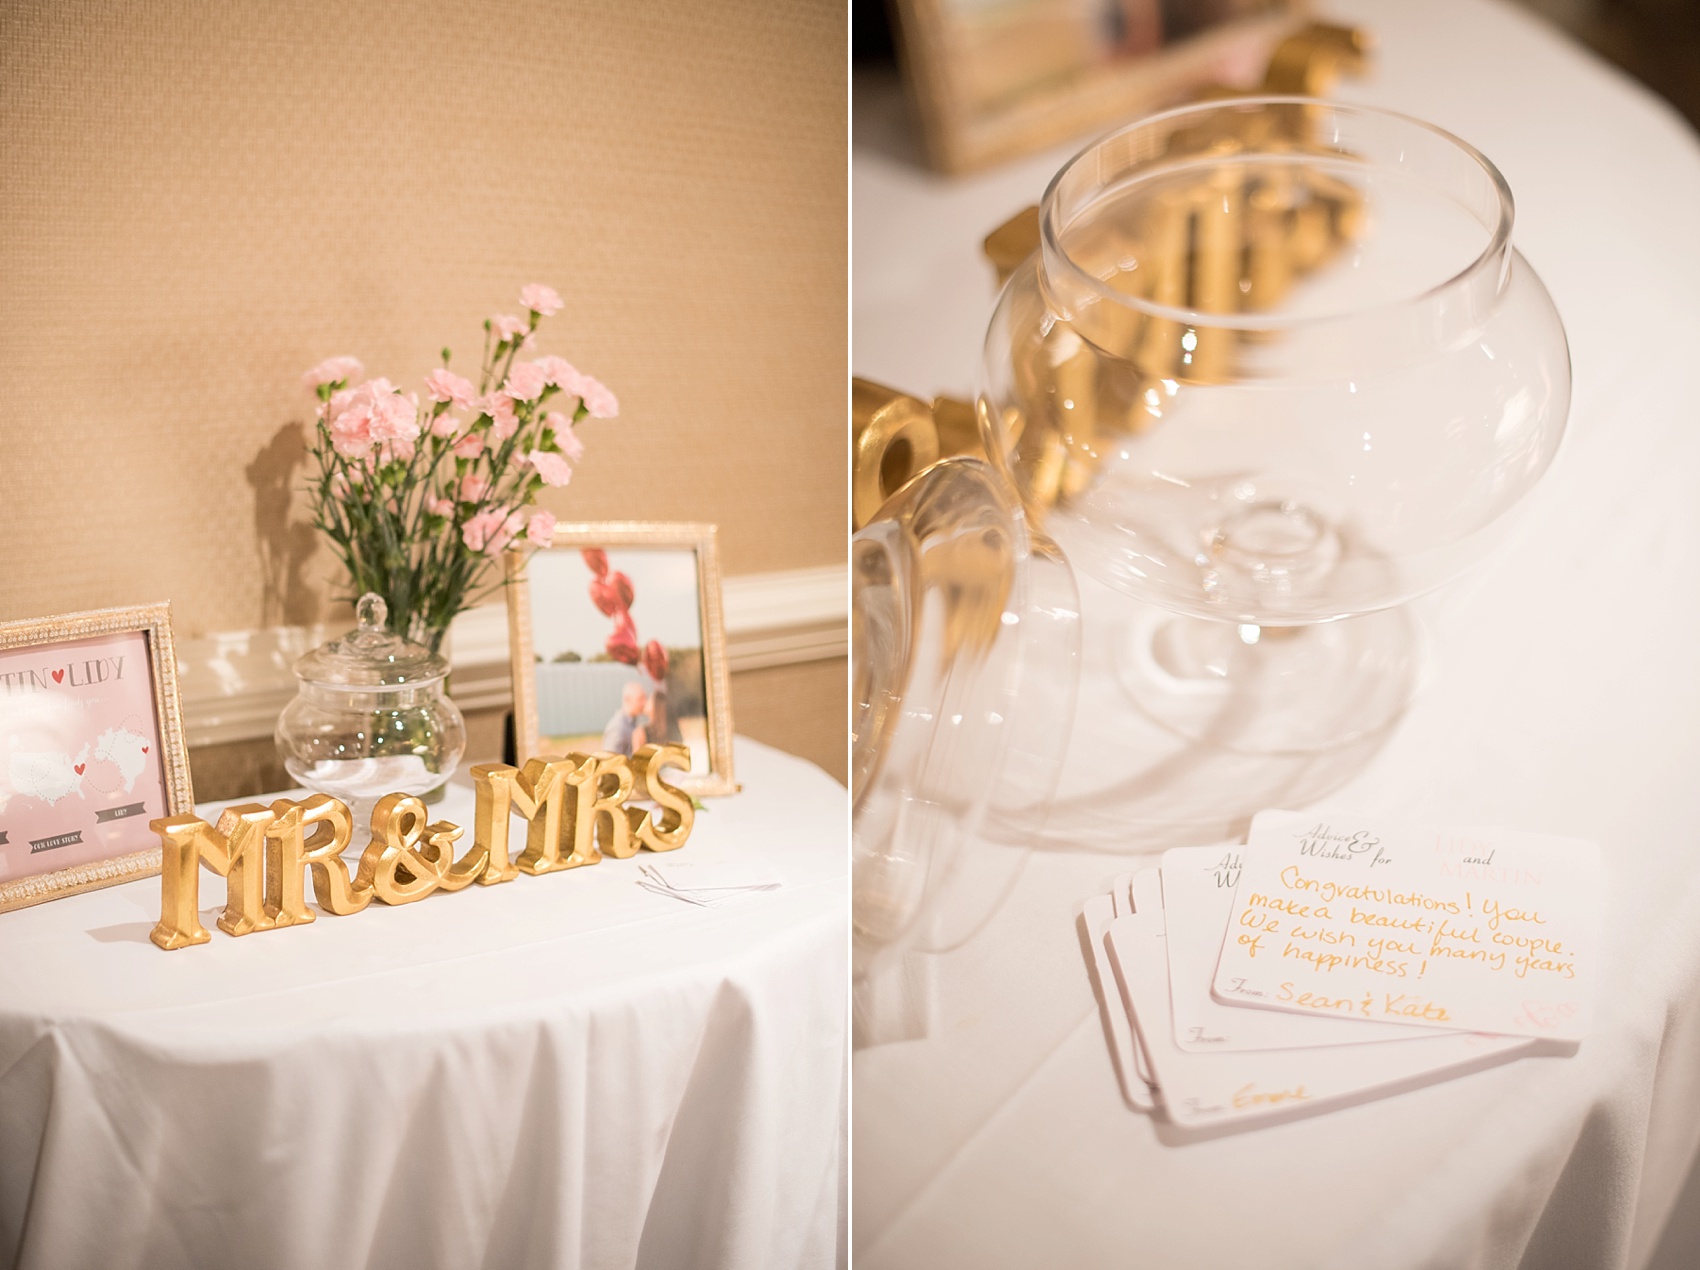 Raleigh wedding photos by Mikkel Paige Photography. Intimate wedding with Mr. and Mrs. gold sign and advice cards jar.